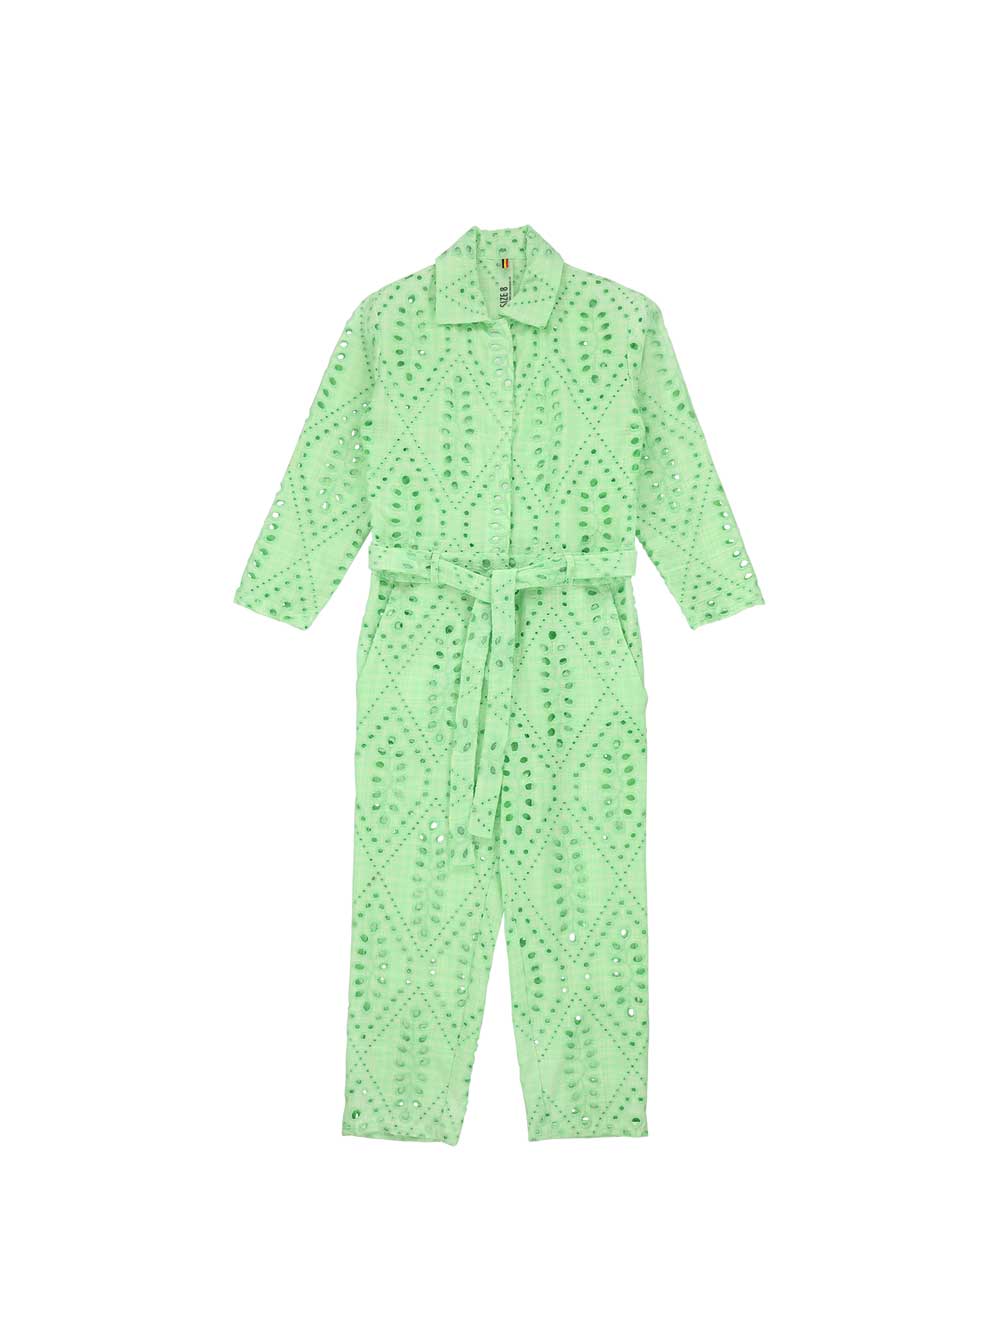 Green Eyelet Overall